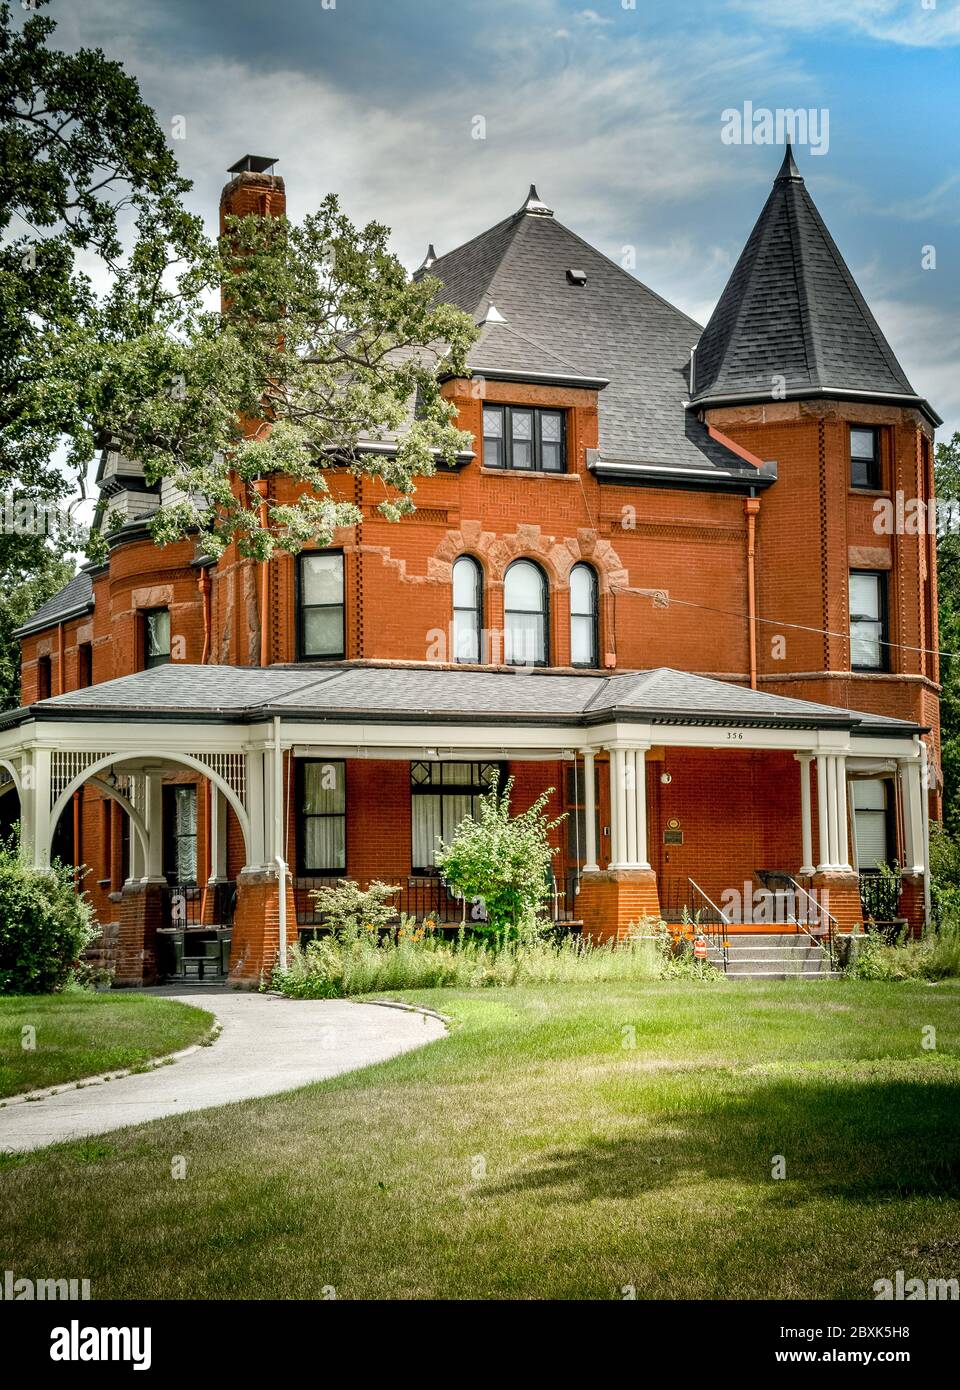 A stunning Queen Anne architectural style residence built in 1893 for  Nehemiah P. Clark in St. Cloud, MN, USA Stock Photo